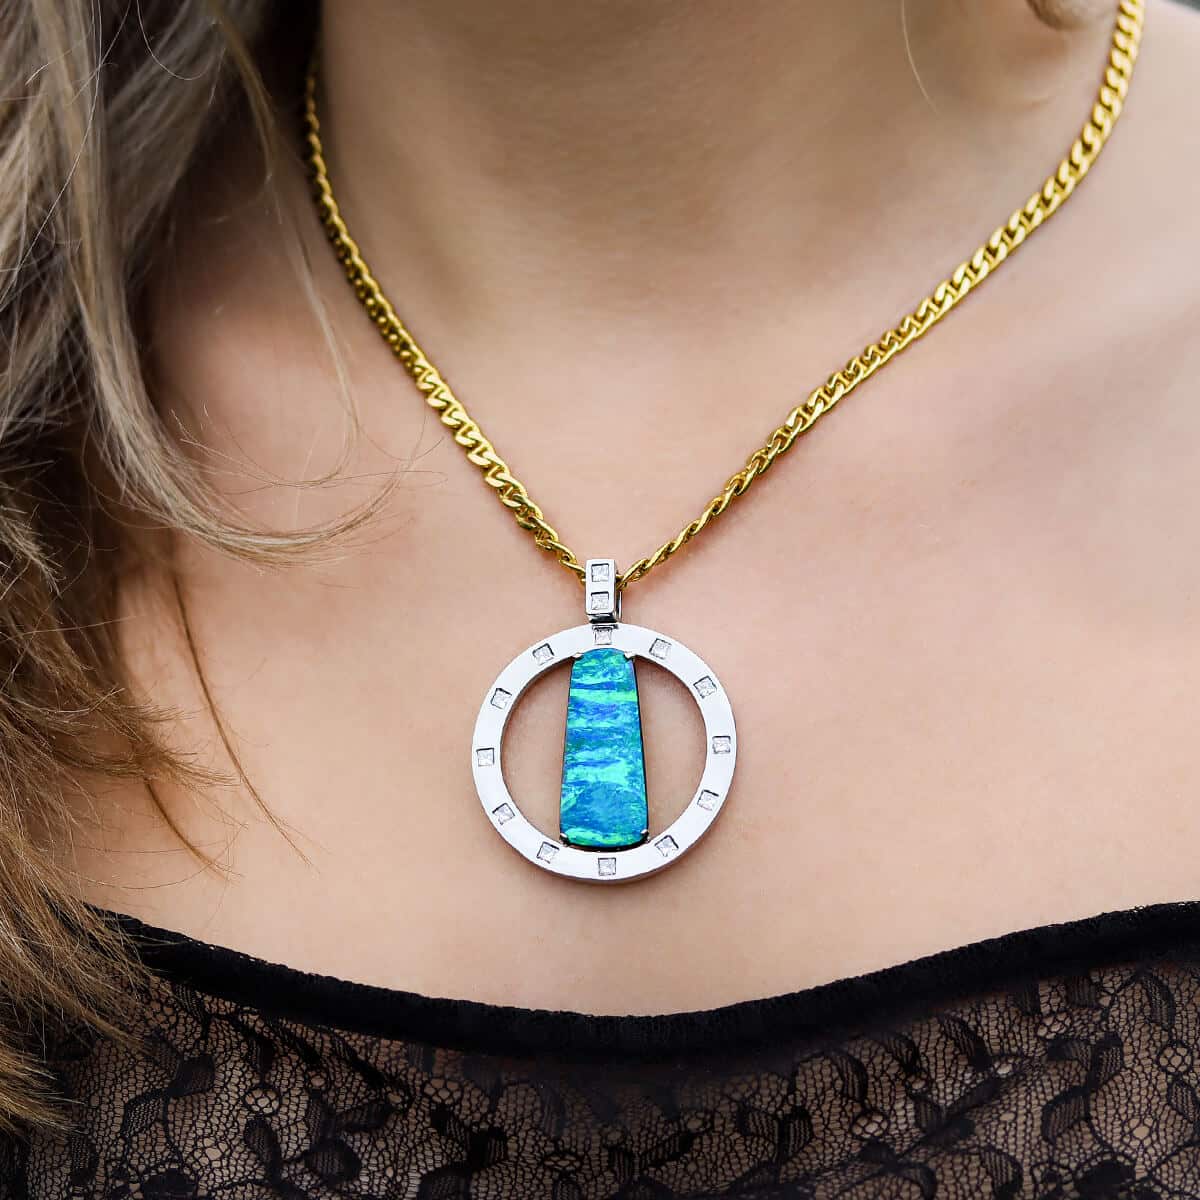 A close-up of a hand-crafted boulder opal pendant on a thick 18K solid gold chain around a young woman’s neck. The round pendant is photographed front on and the vivid blue and green tones of the Australian boulder opal contrast nicely with the platinum ring the rectangular opal is set vertically within.